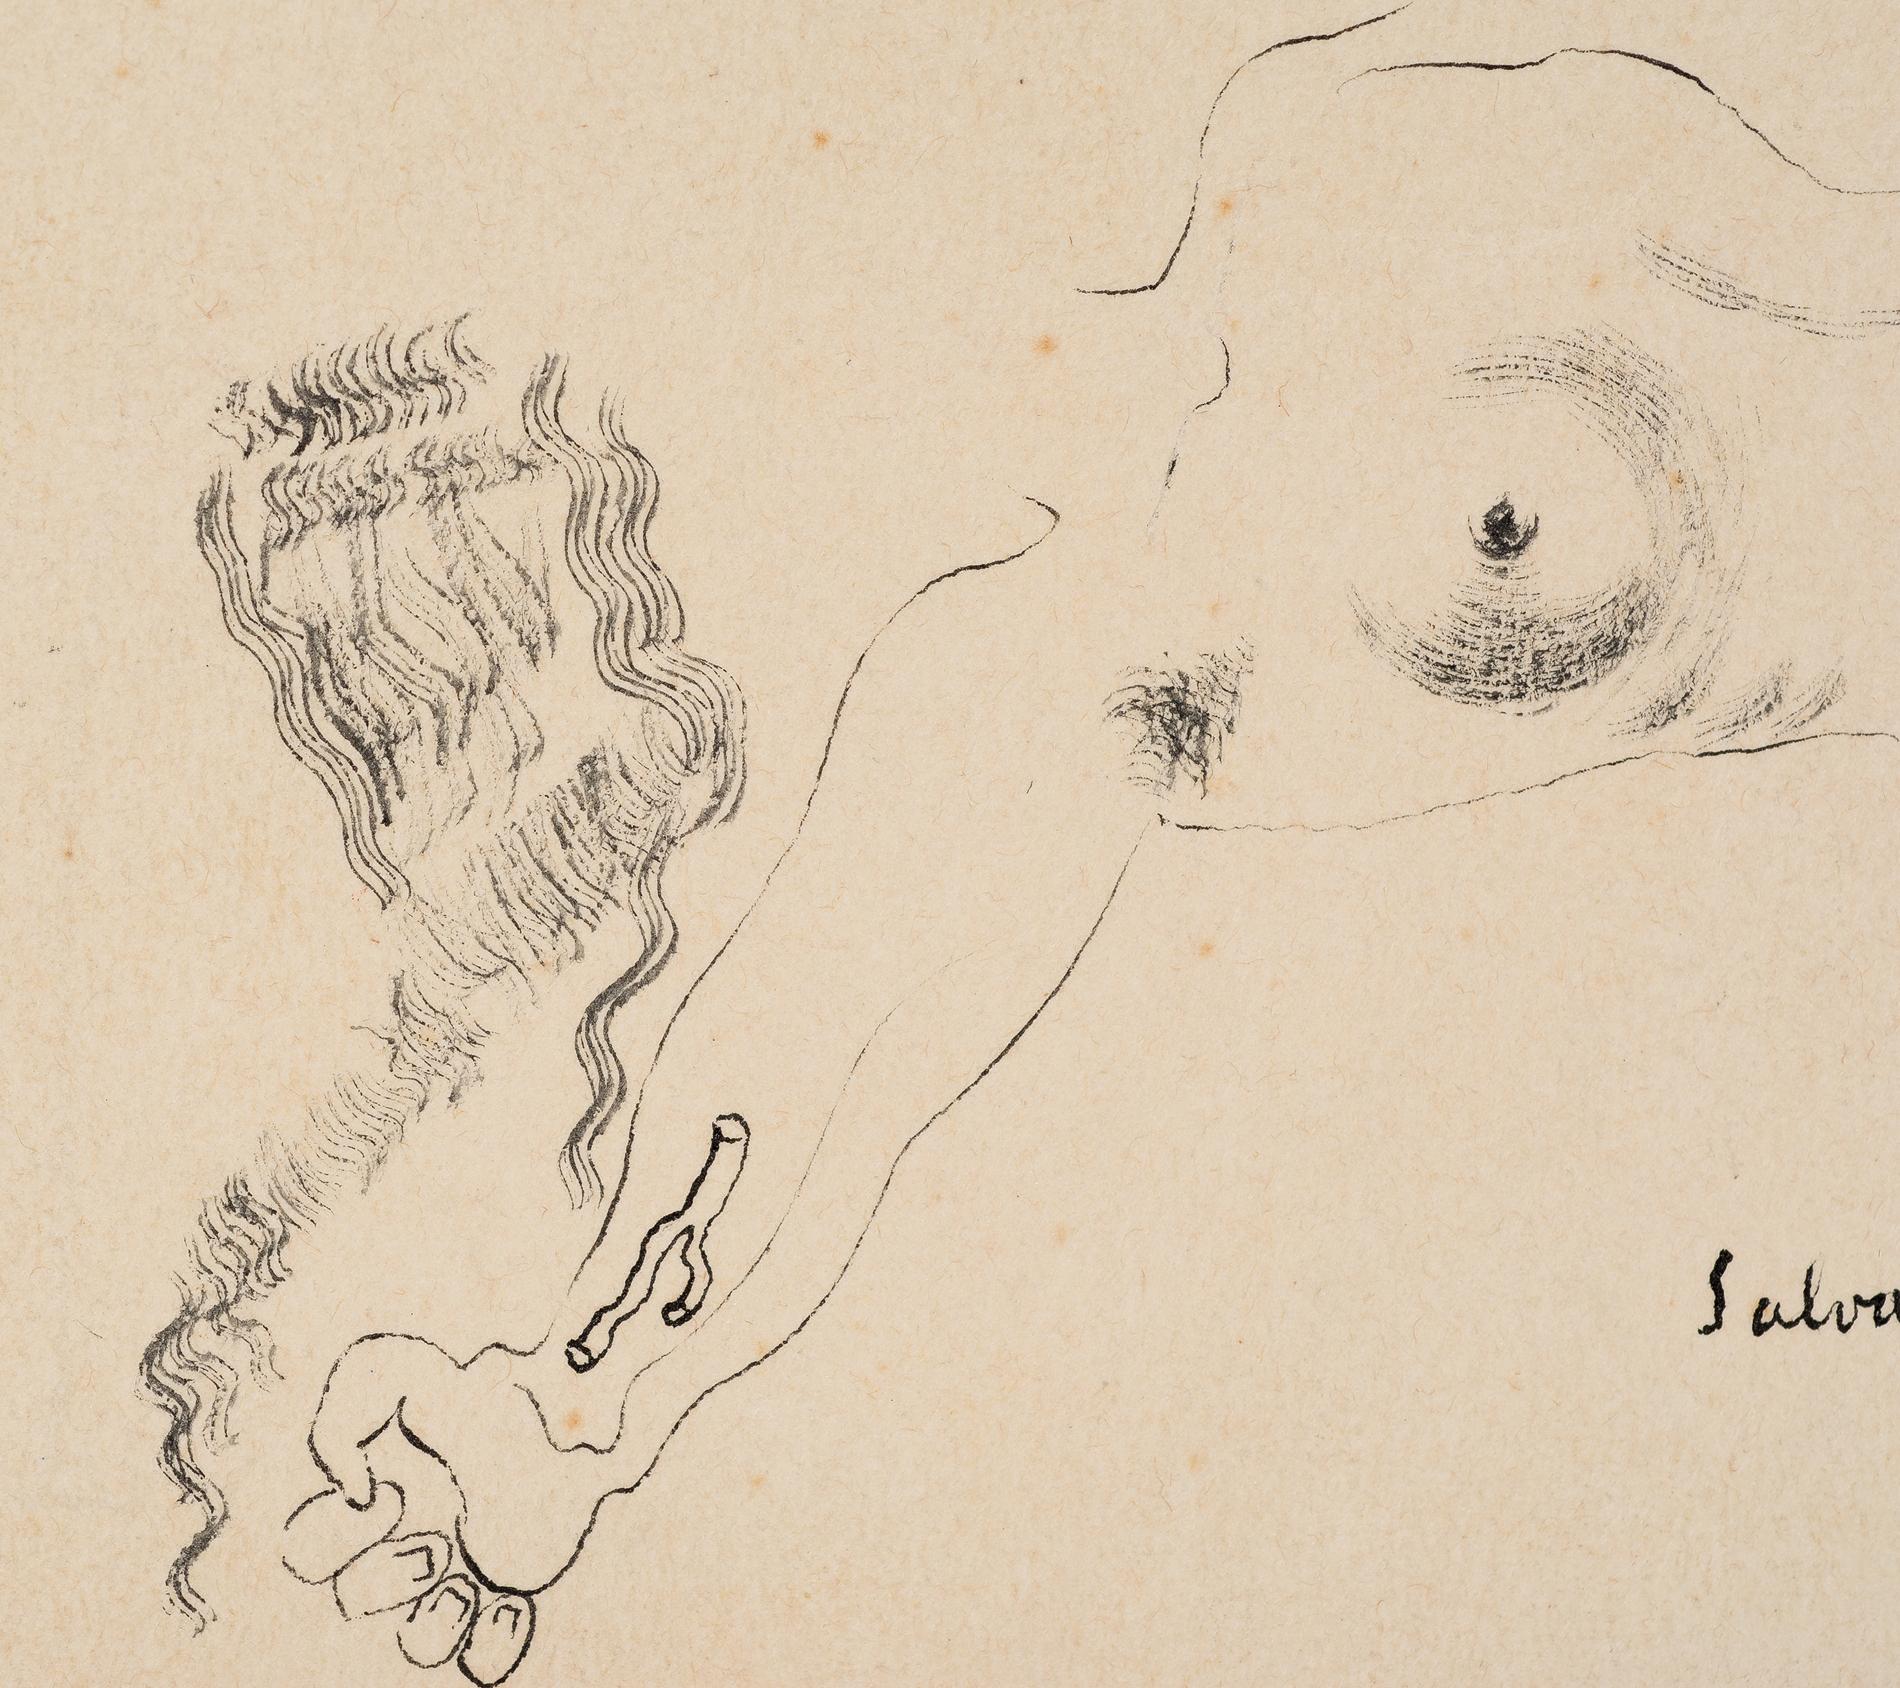 Salvador Dalí (Figueres, 1904 - 1989)
Ink drawing on paper. Signed and dated in 1927.
This is a drawing of a female torso with a muscular arm. It was published for the first time in the October 1927 edition of the magazine 